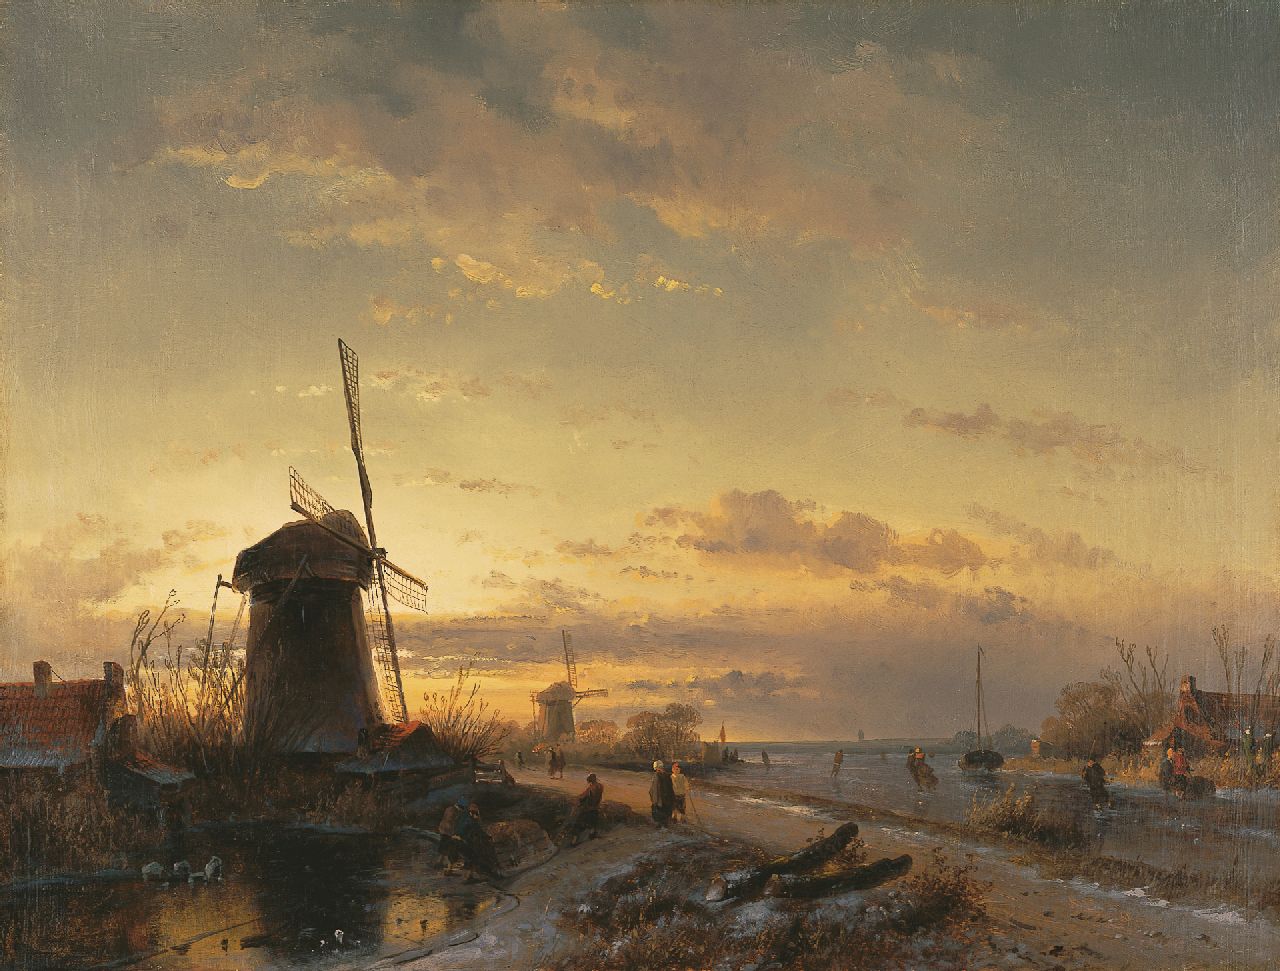 Leickert C.H.J.  | 'Charles' Henri Joseph Leickert, Landscape with skaters at sunset, oil on canvas 43.5 x 57.6 cm, signed l.l. remainders of signature